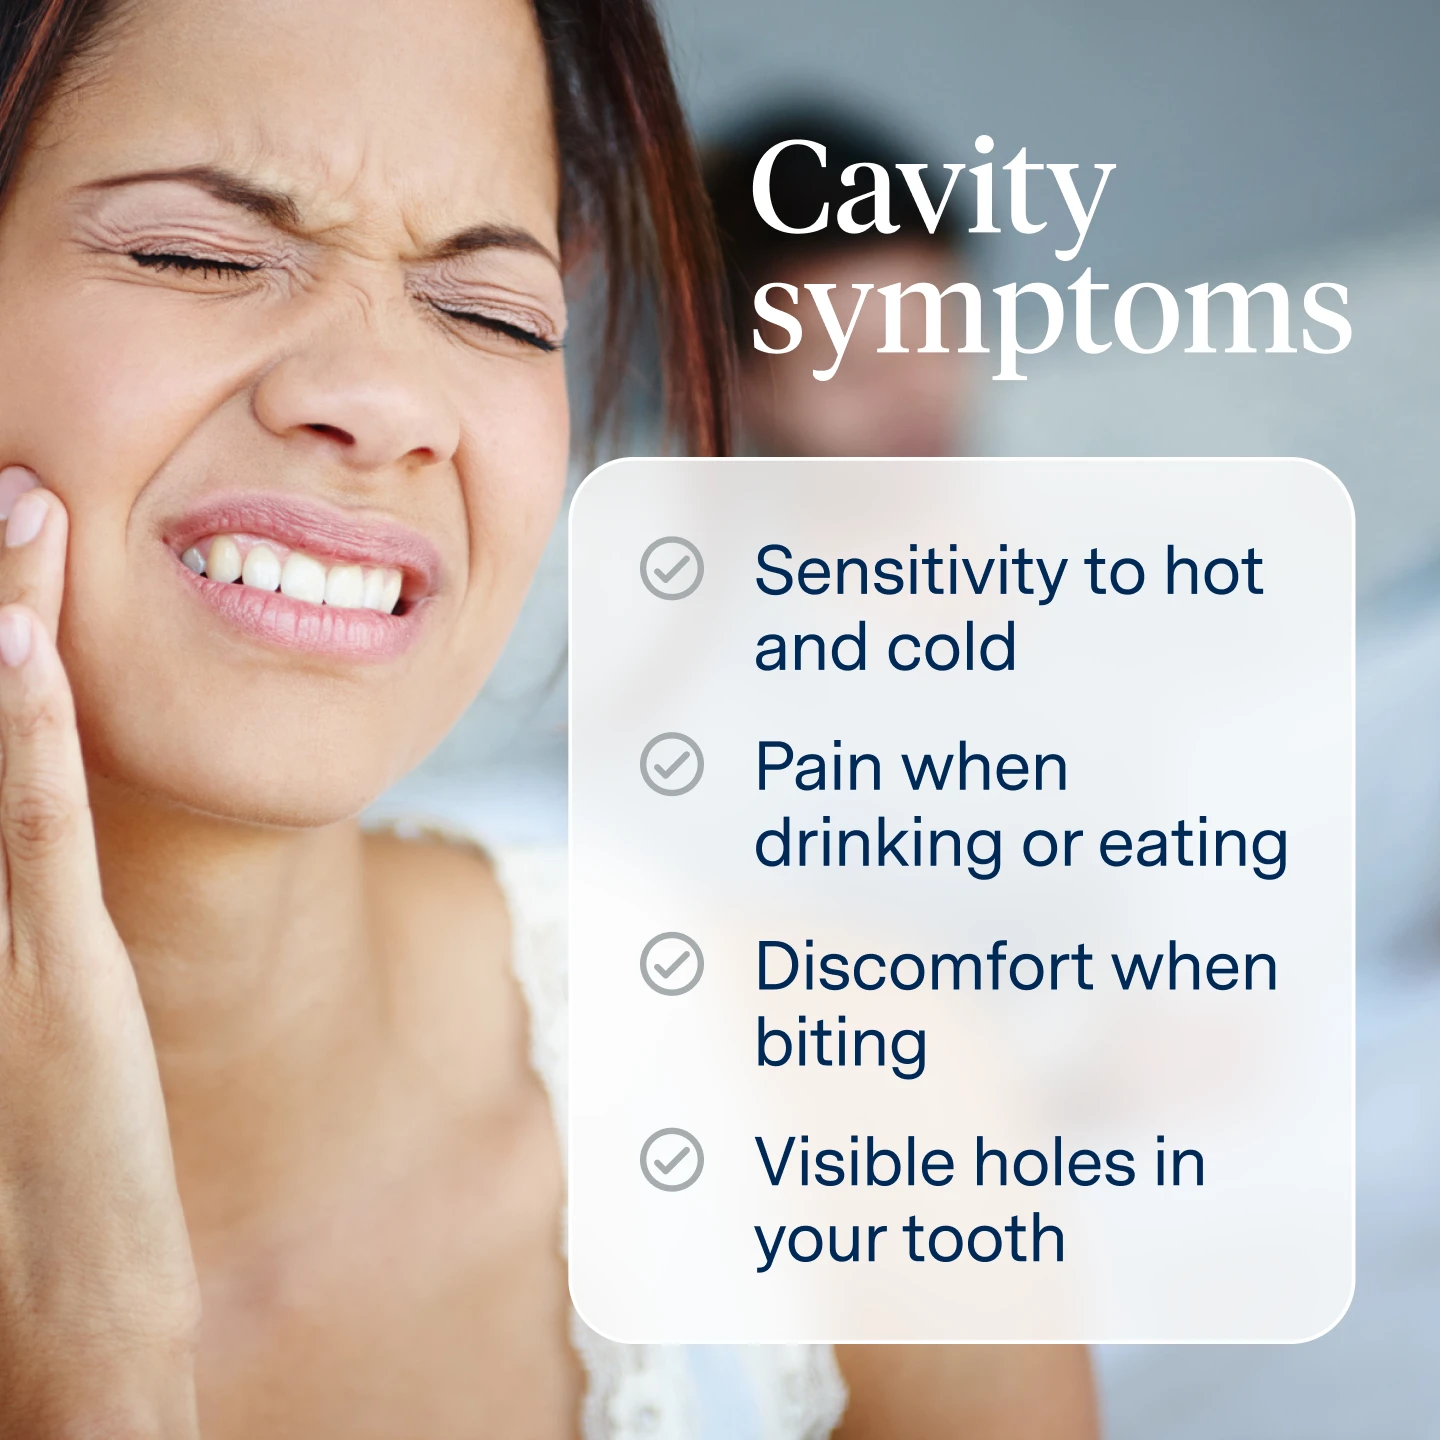 Cavity Symptoms: sensitivity to hot and cold, pain when eating or drinking, discomfort when biting, visible holes in your tooth. 